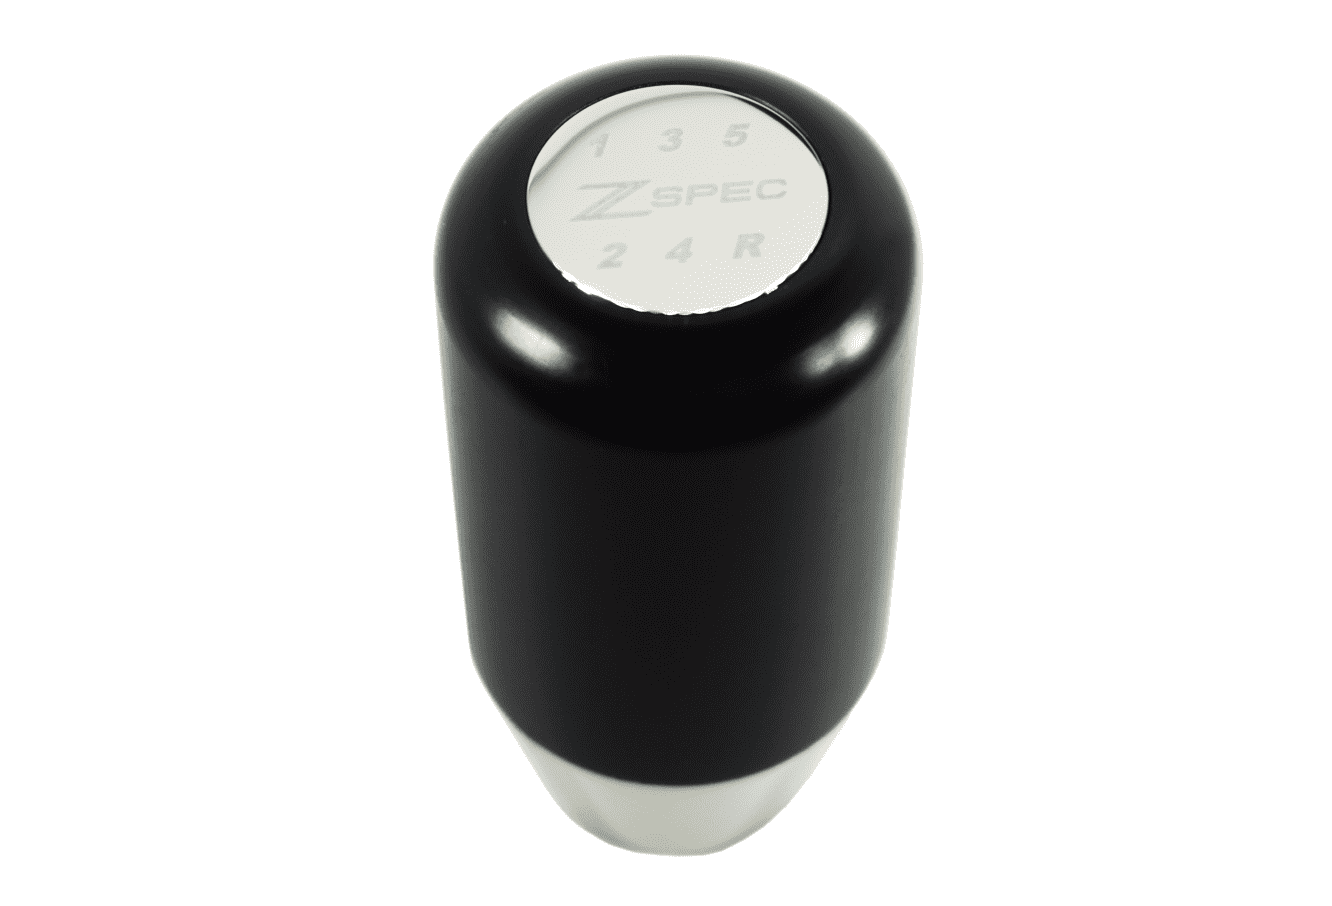 ZSPEC SCENE Shift Knob, M10-1.25, Delrin & Stainless, 5-Speed Shift Pattern Coin Nissan NISMO 300zx  300zx Z32 Nissan R32 R33 R34 Beauty Accessory Interior Performance Upgrade